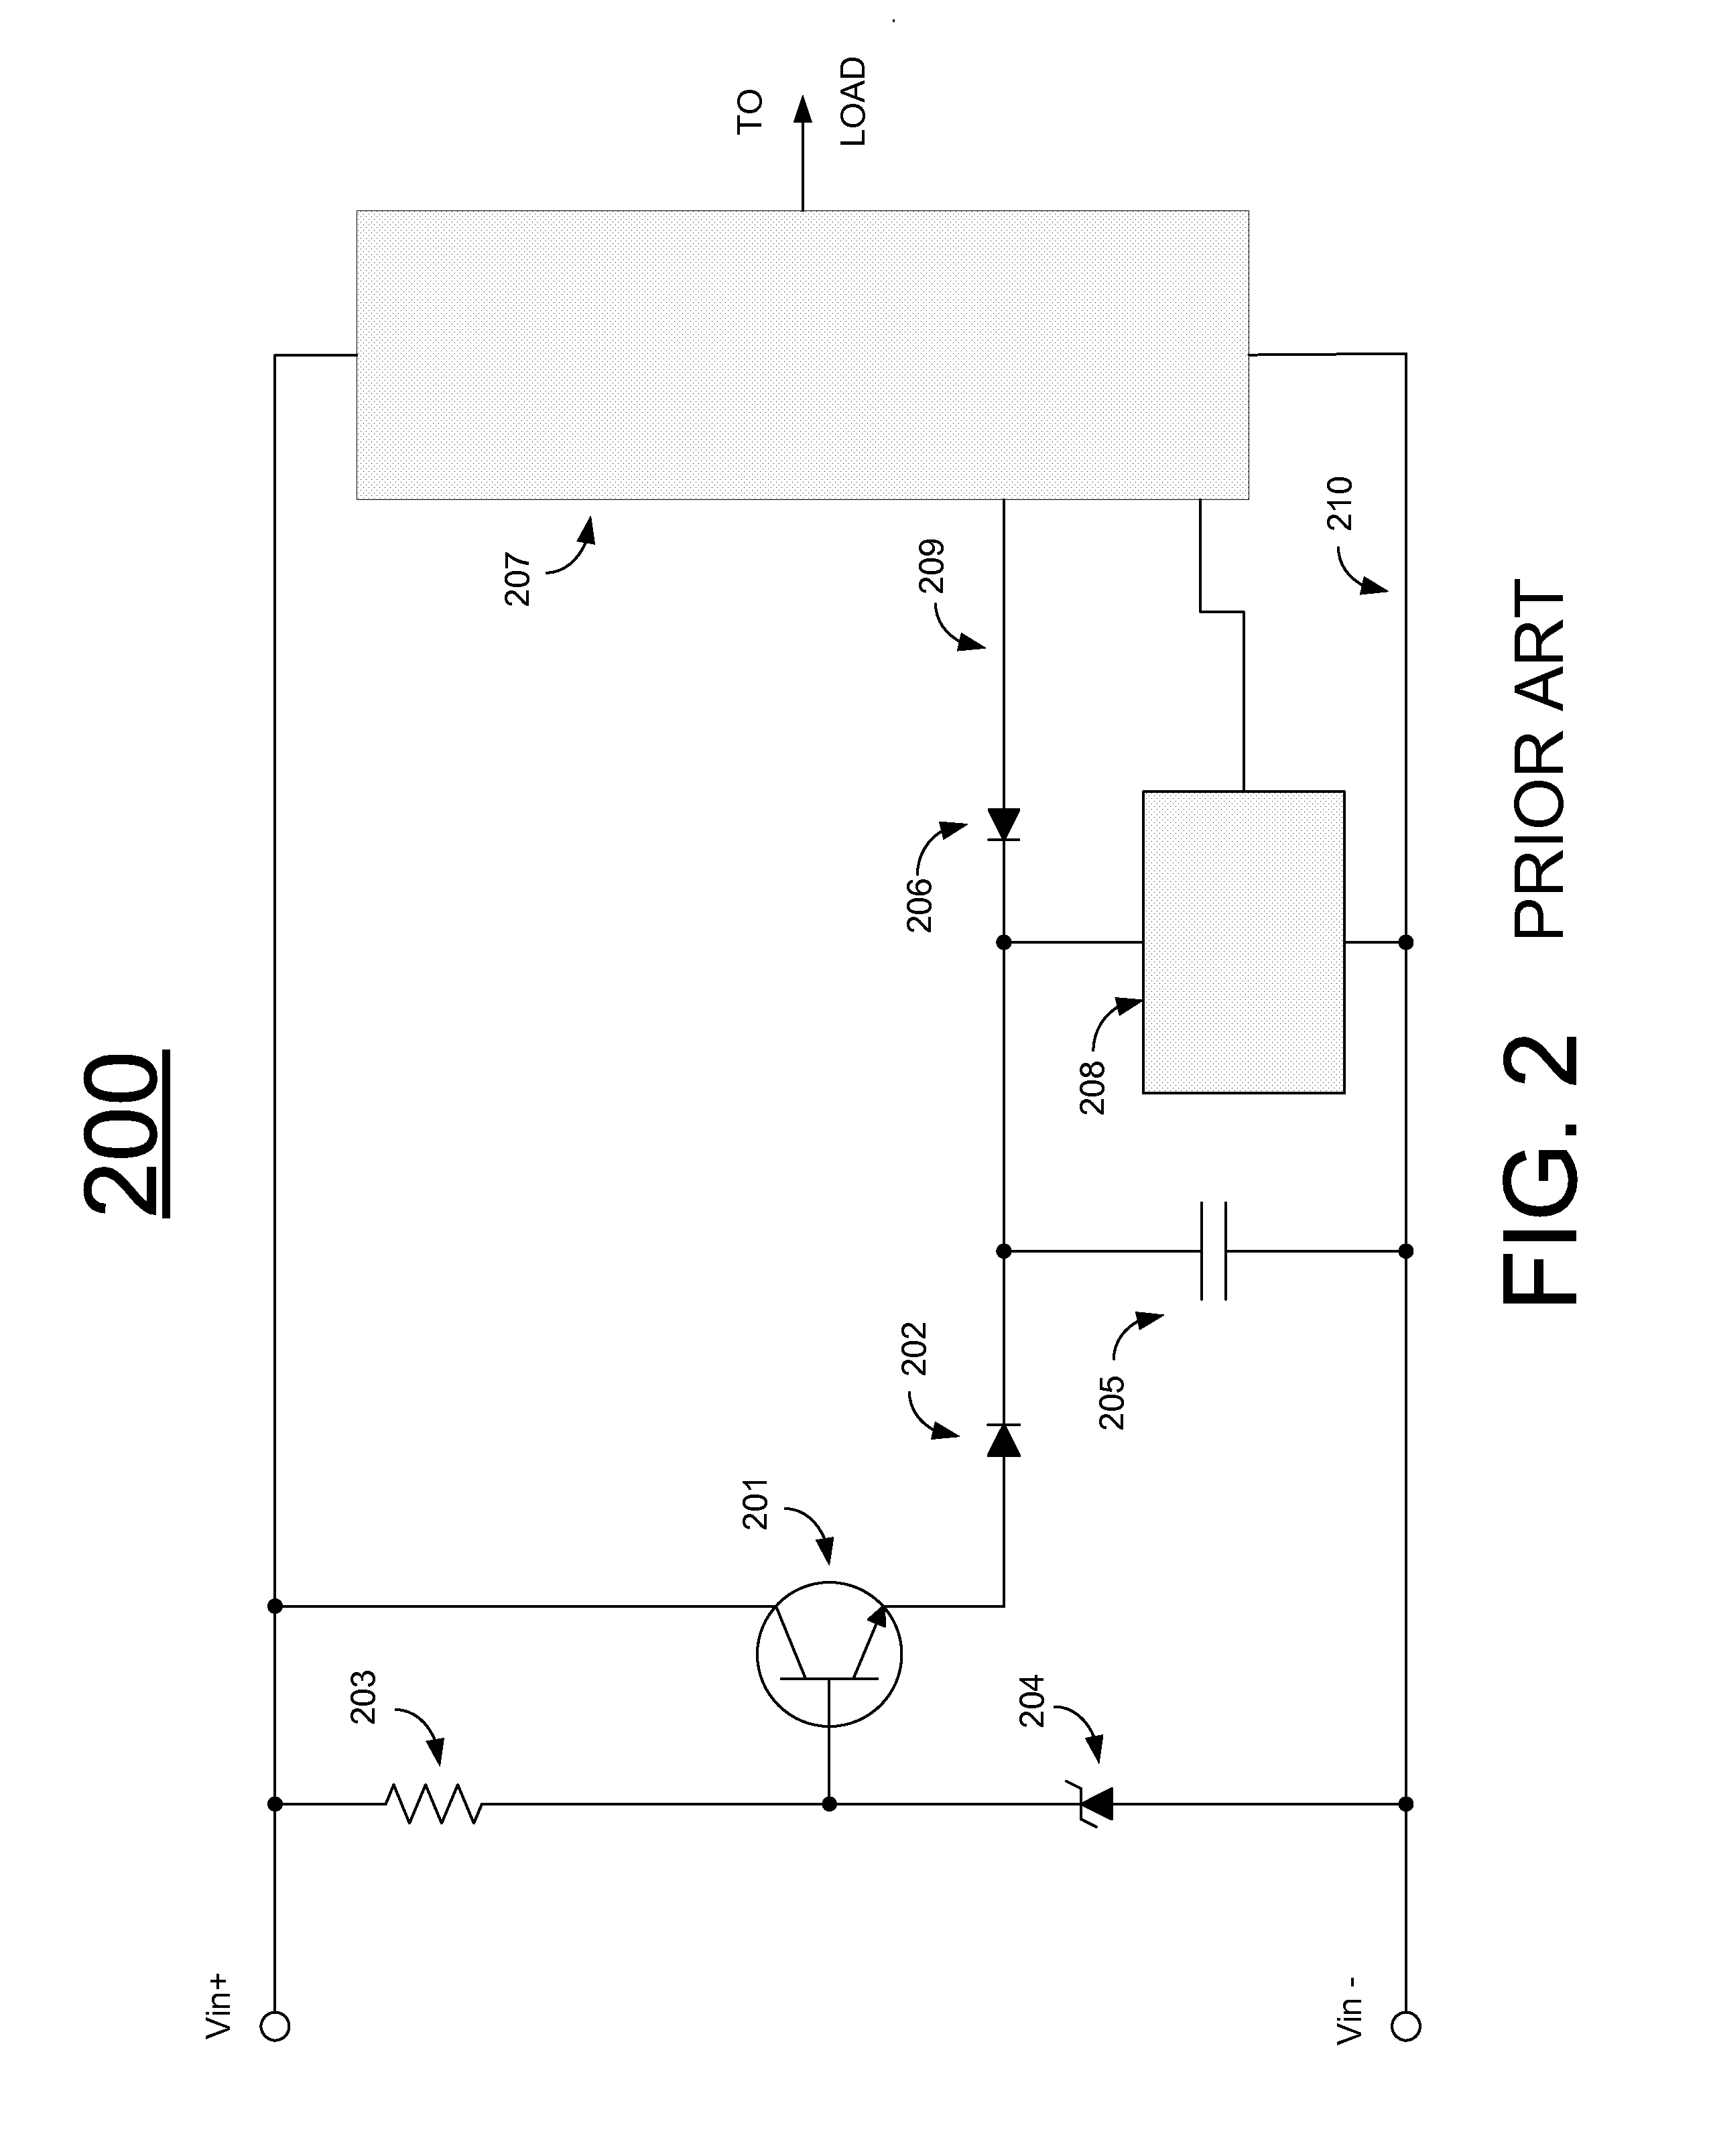 Start-up circuit for power converters with wide input voltage range